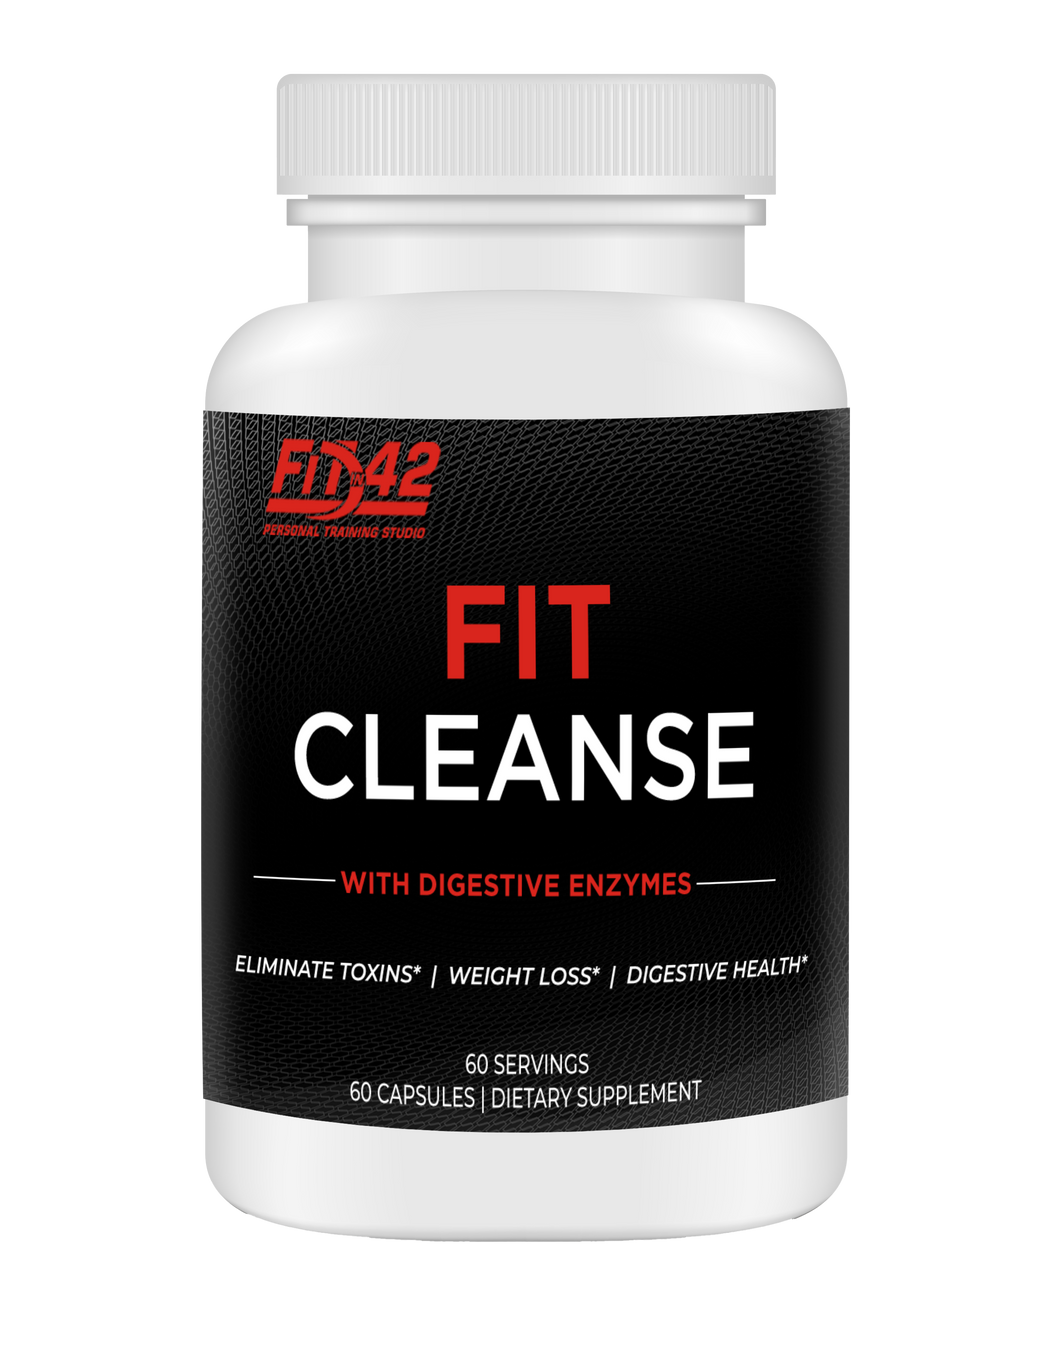 Fit Cleanse